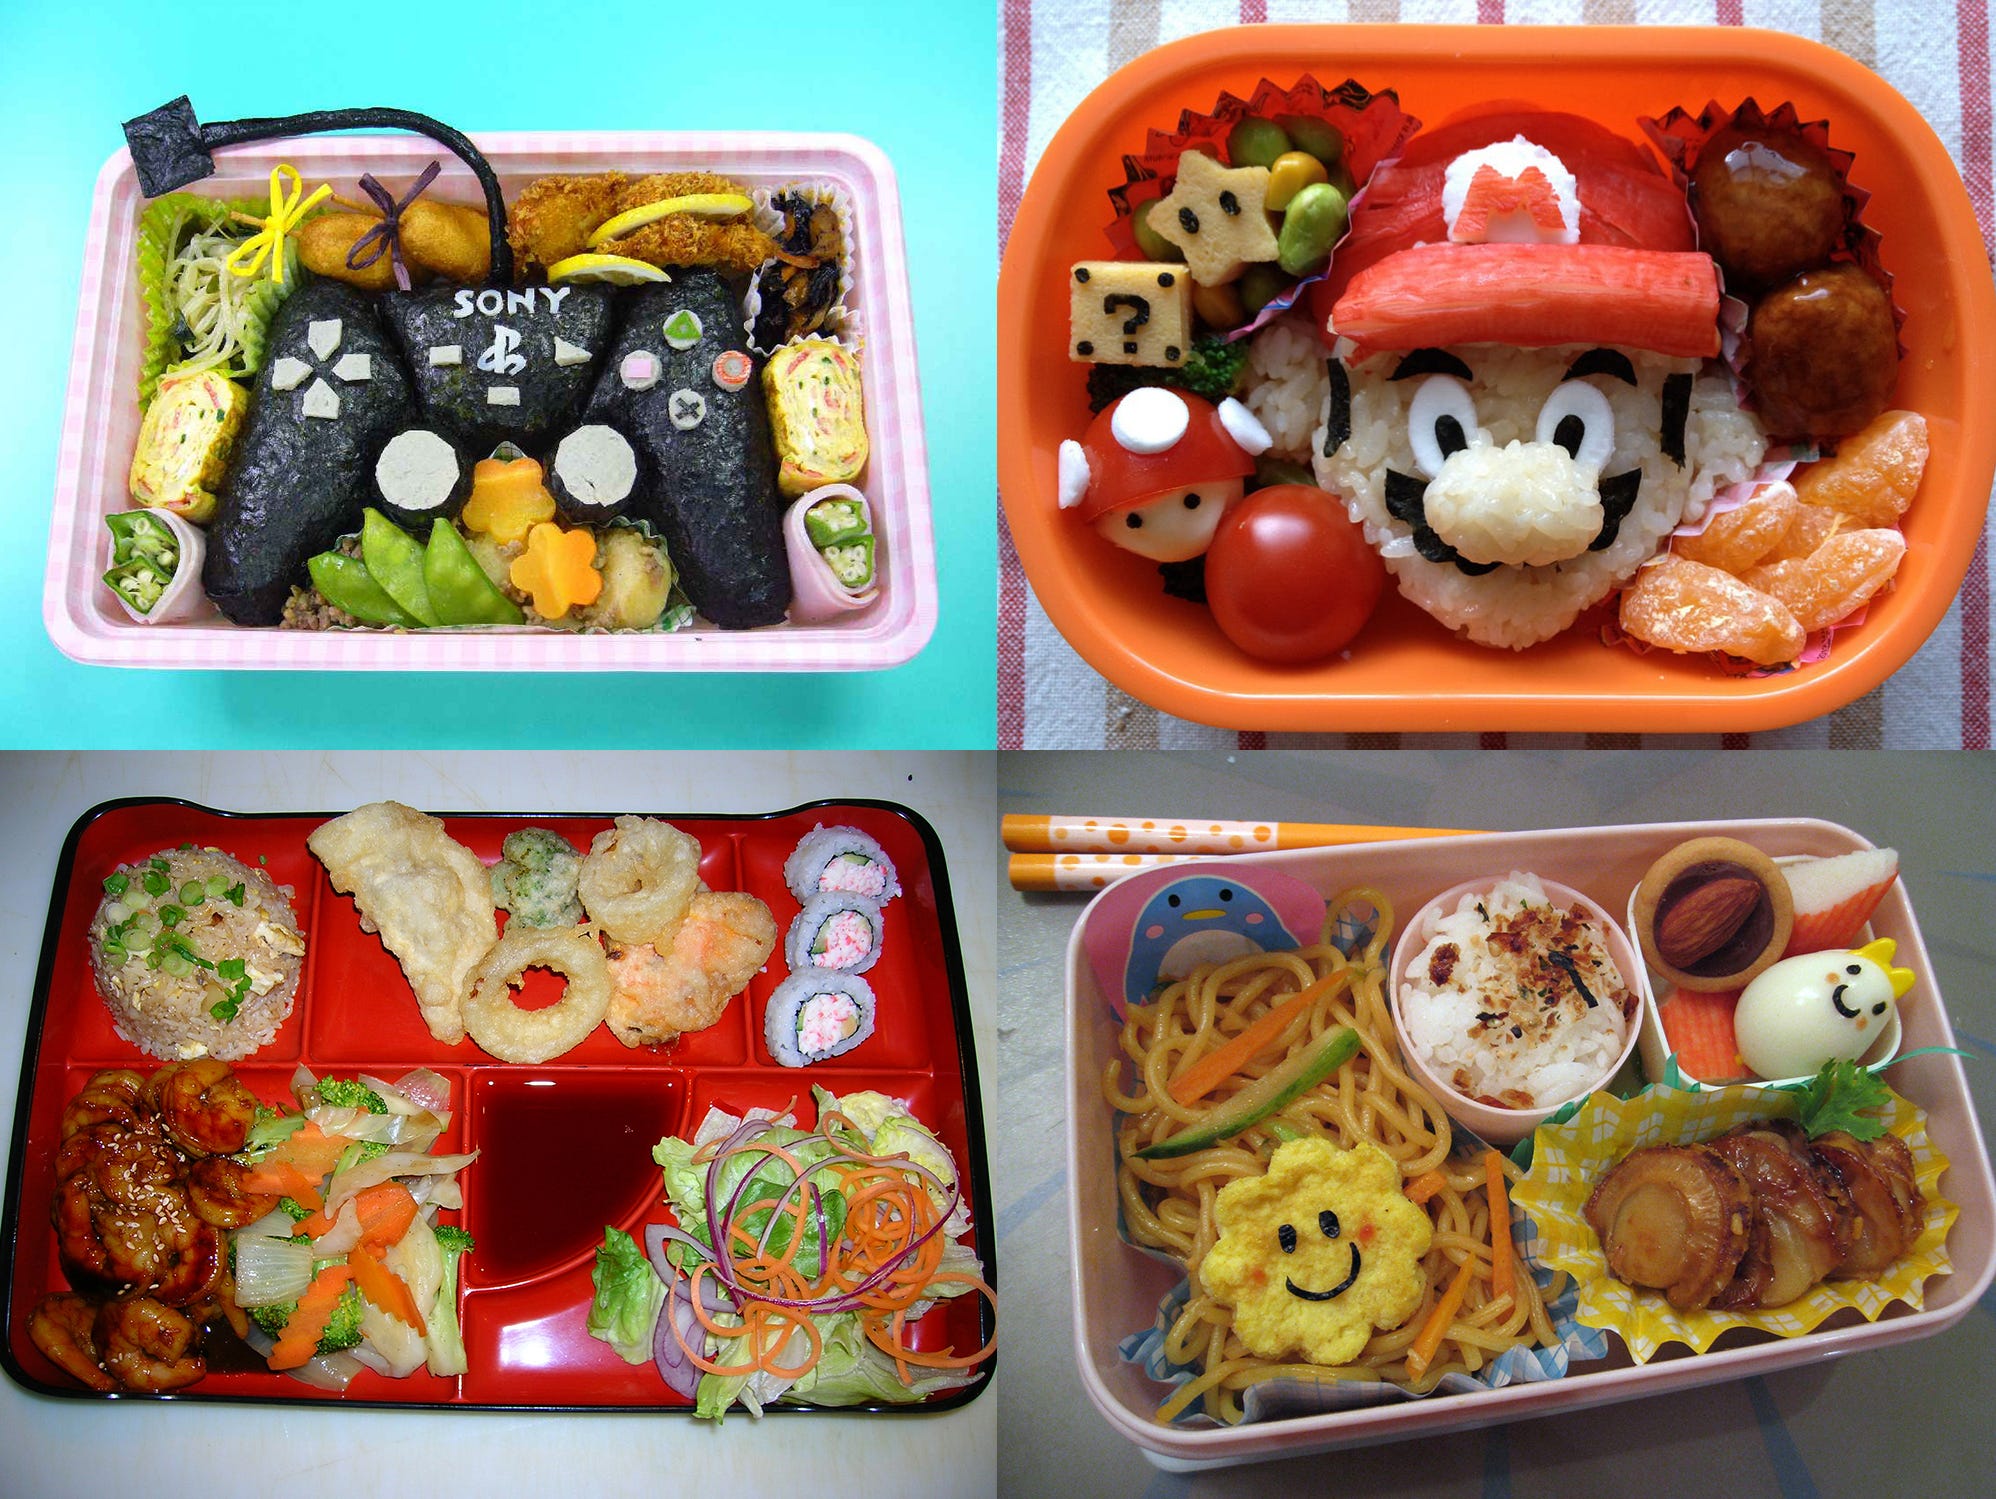 The controversial history of the bento box, by Stephanie Buck, Timeline